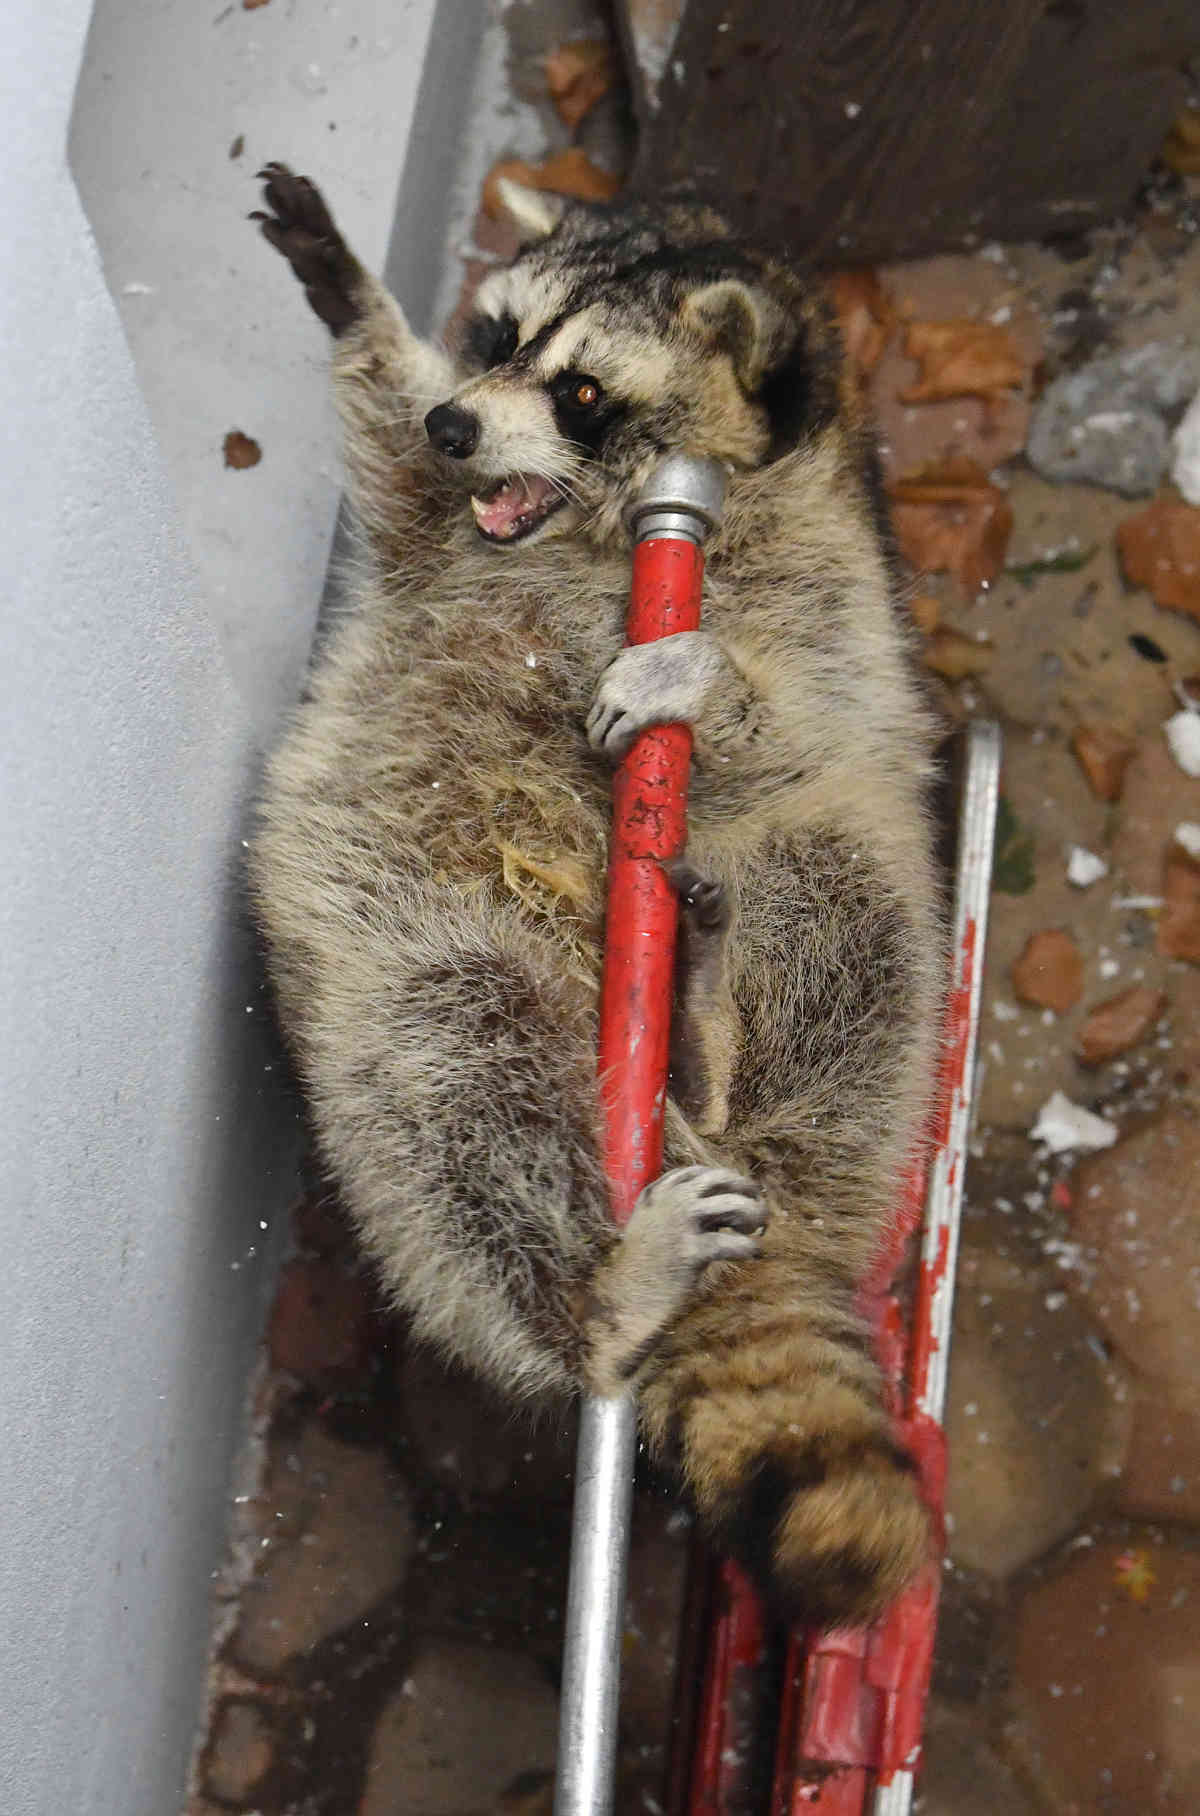 Immunized from the skies: Feds dropping rabies-vaccine-laced bait for raccoons over boro